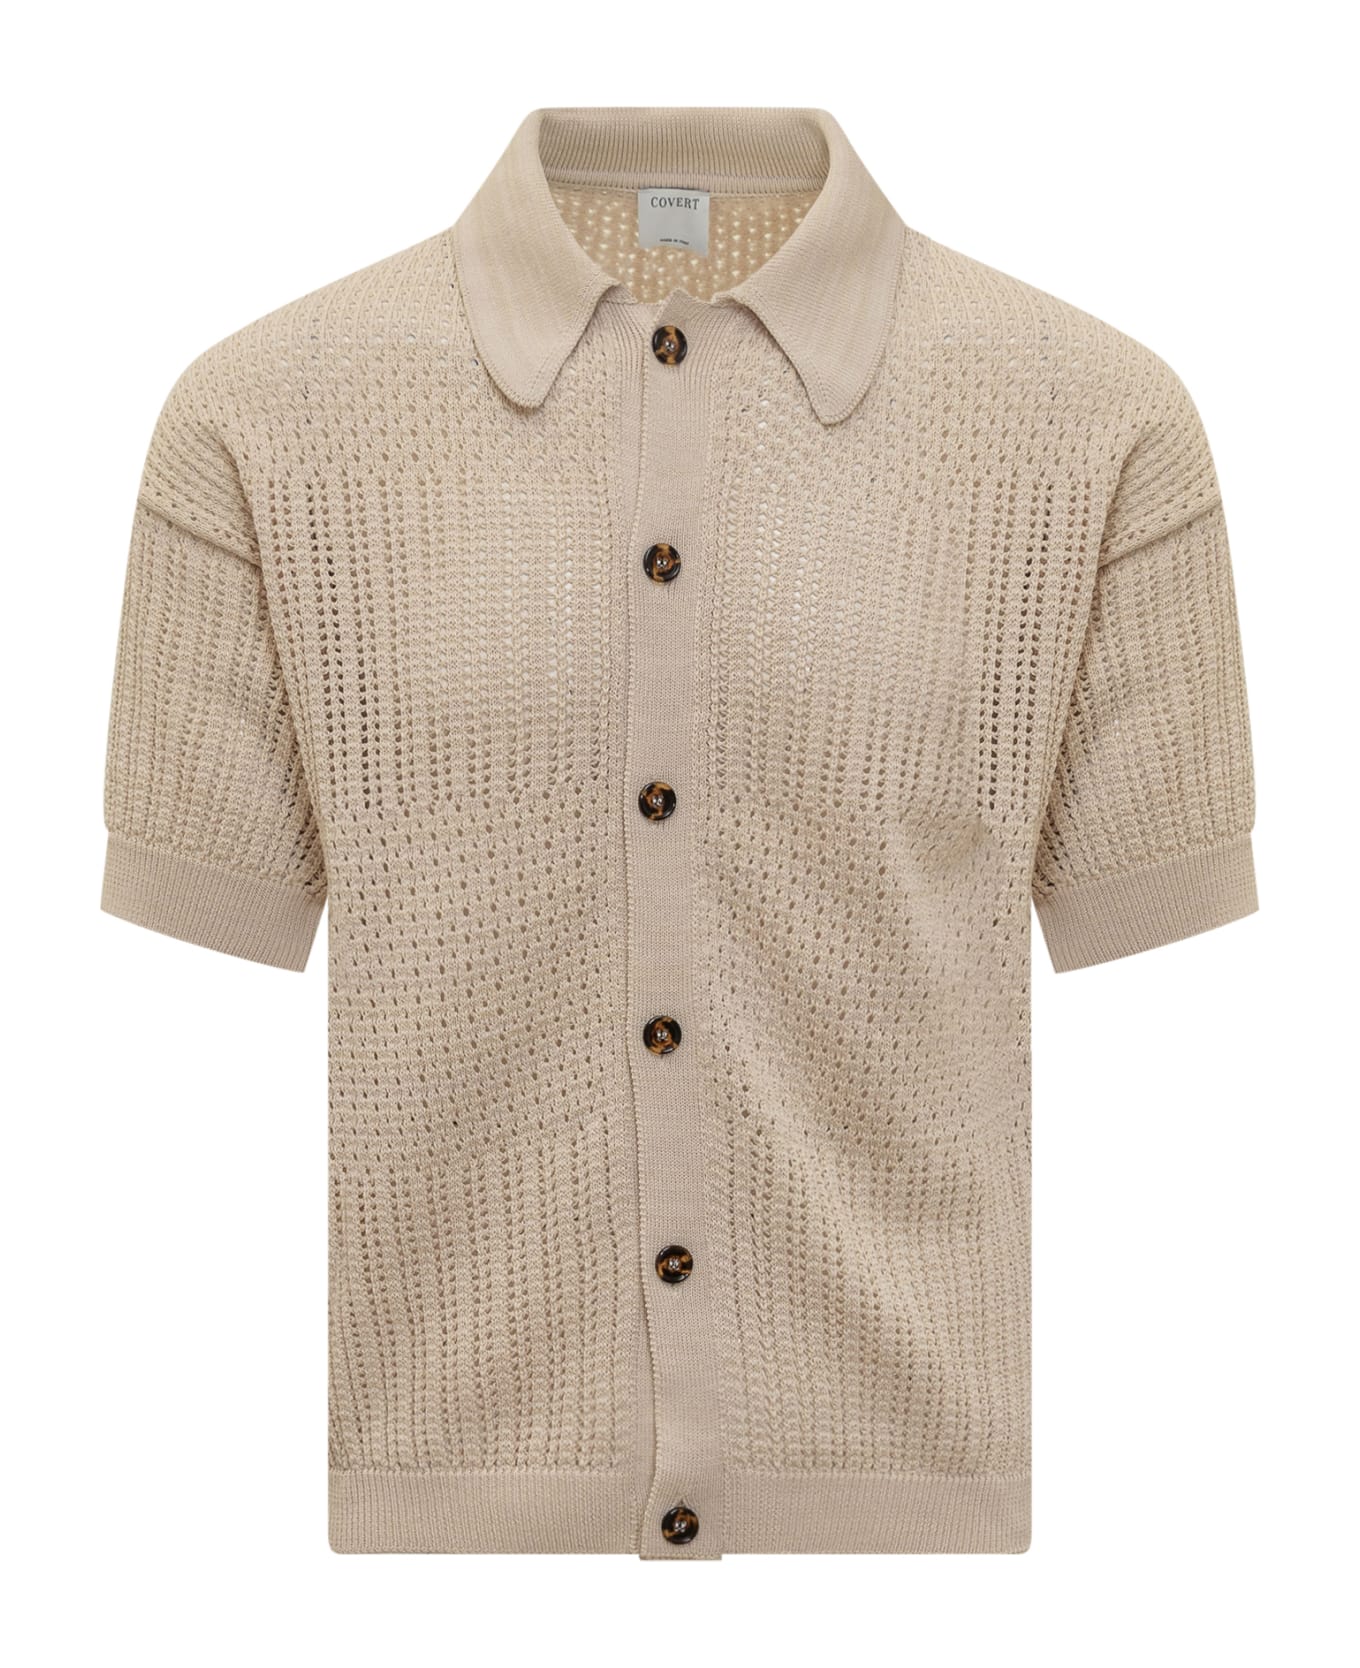 Covert Short Sleeves Polo - BEIGE ポロシャツ